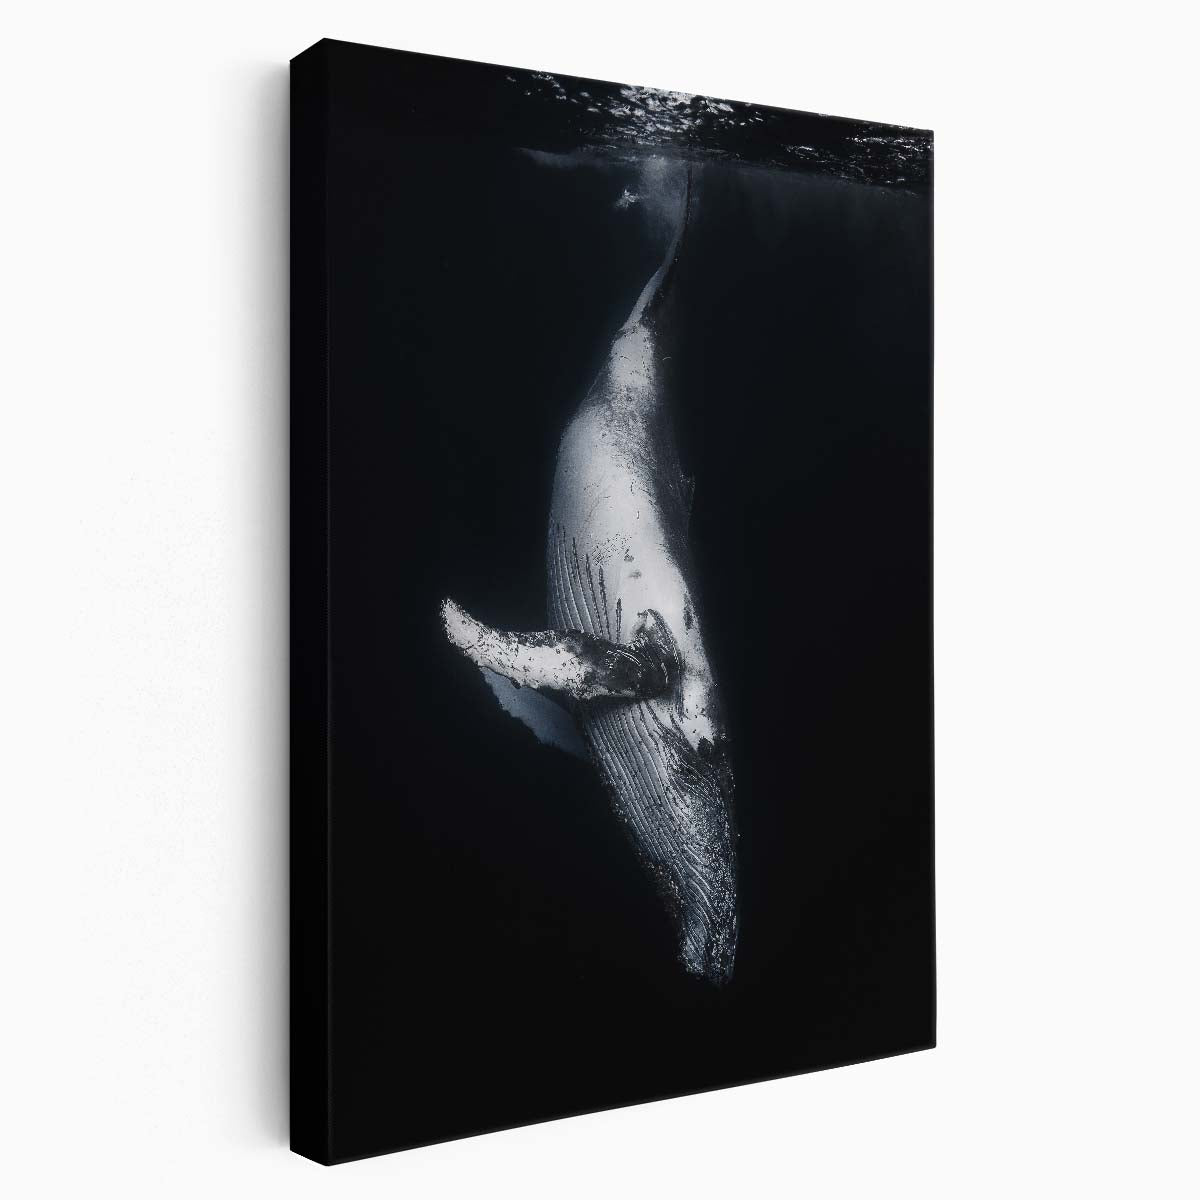 Majestic Humpback Whale Underwater Photography, Reunion Island France by Luxuriance Designs, made in USA